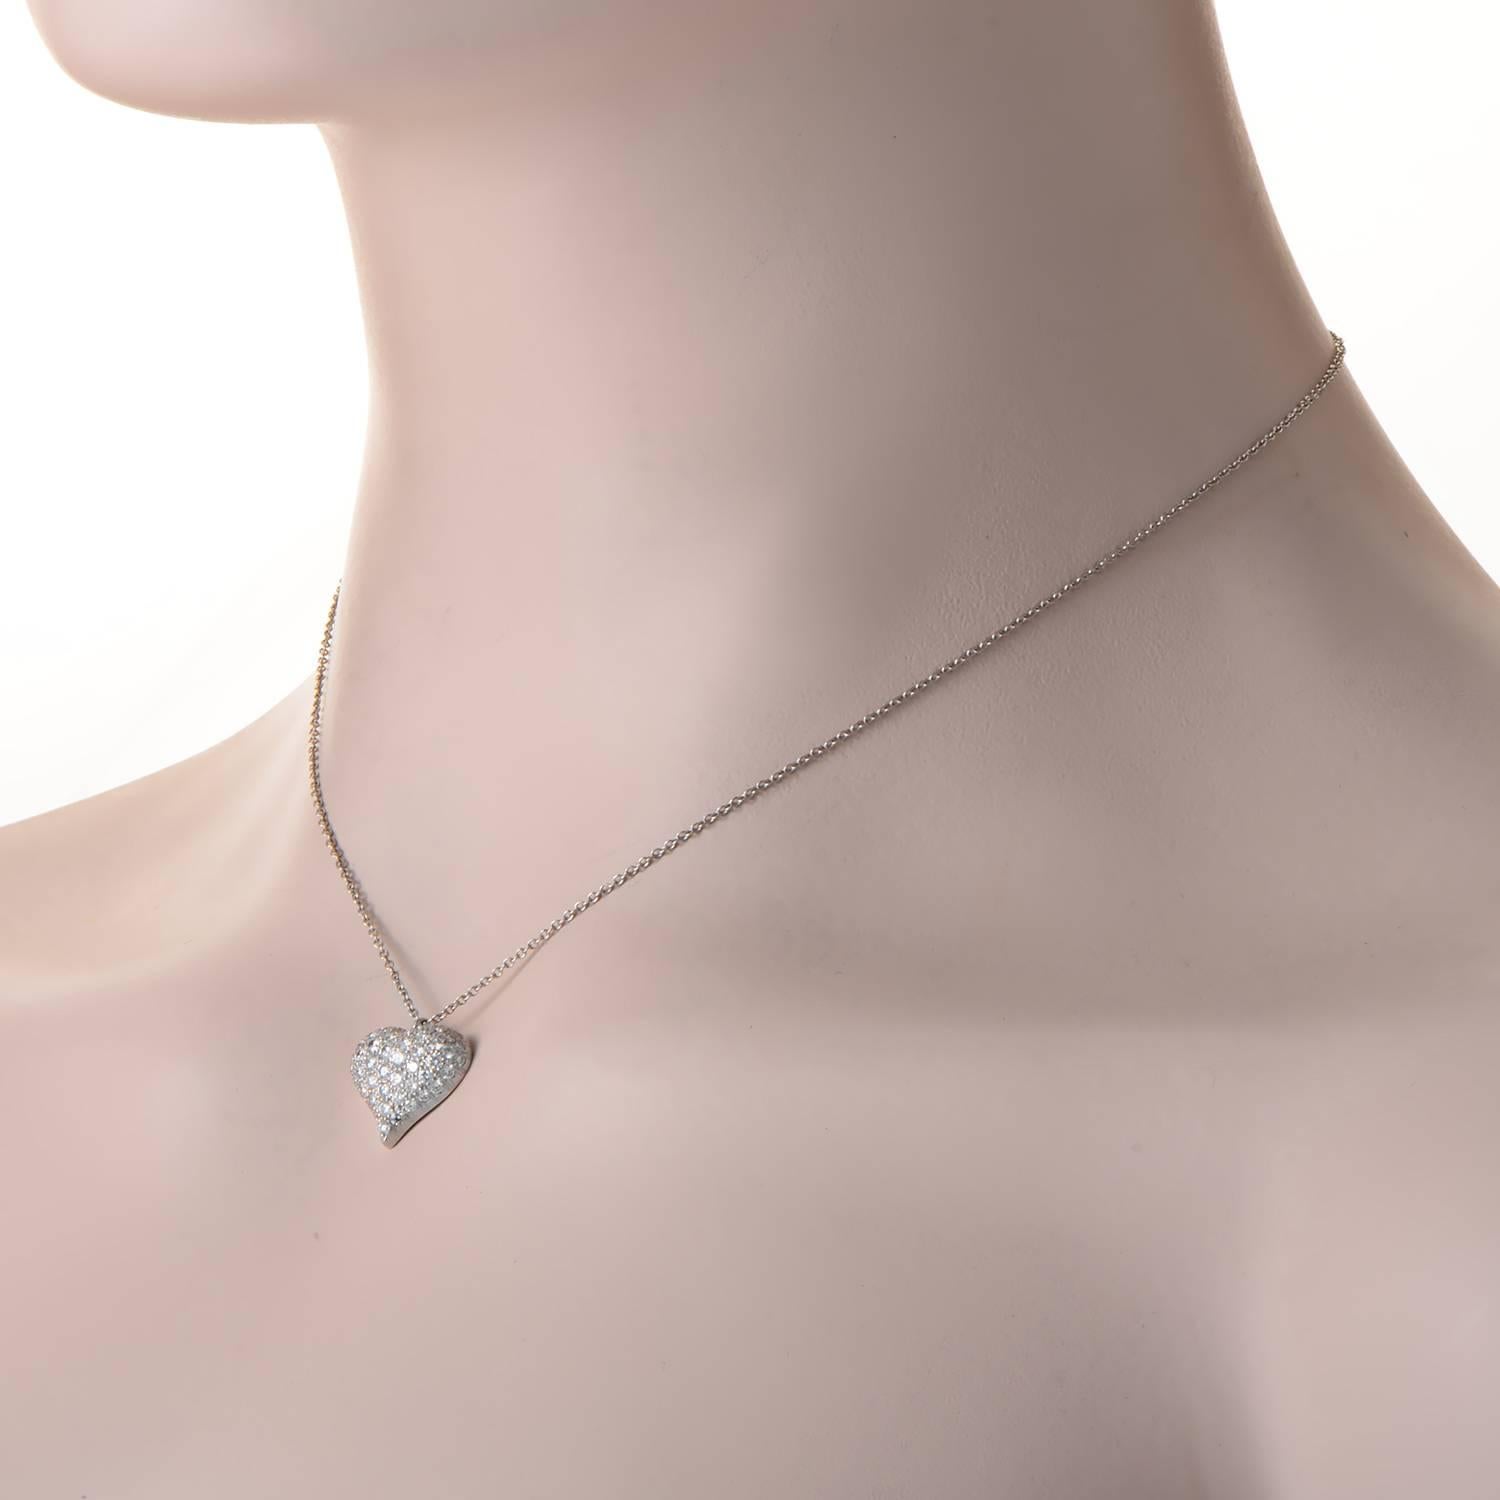 Classy and elegant, with lovely romantic design, this enchanting necklace from Tiffany & Co. offers tasteful luxurious appearance. The necklace is made of prestigious platinum and weighs six grams, while the diamonds paving the heart pendant total